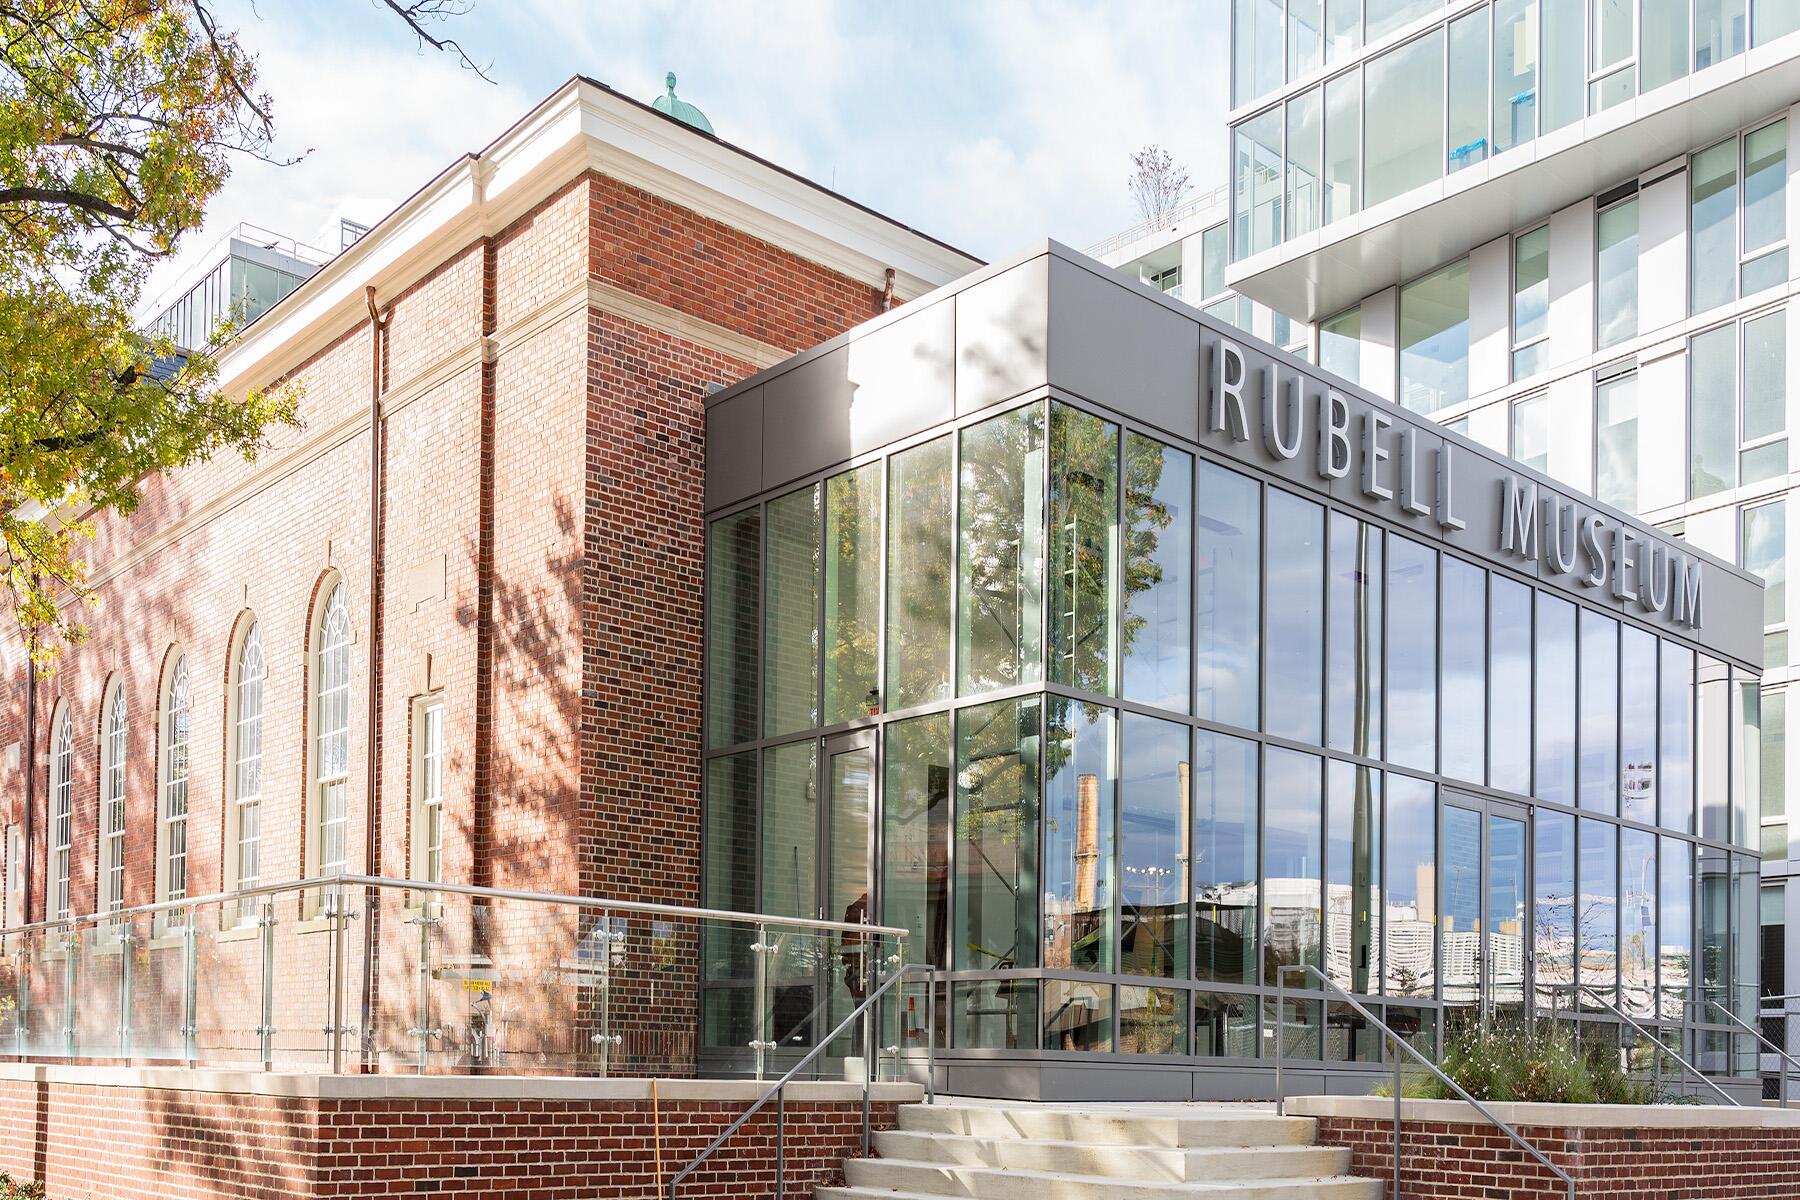 <a href='https://www.fodors.com/world/north-america/usa/washington-dc/experiences/news/photos/the-23-best-museums-in-washington-d-c#'>From &quot;The 30 Best Museums in Washington, D.C.: Rubell Museum D.C.&quot;</a>